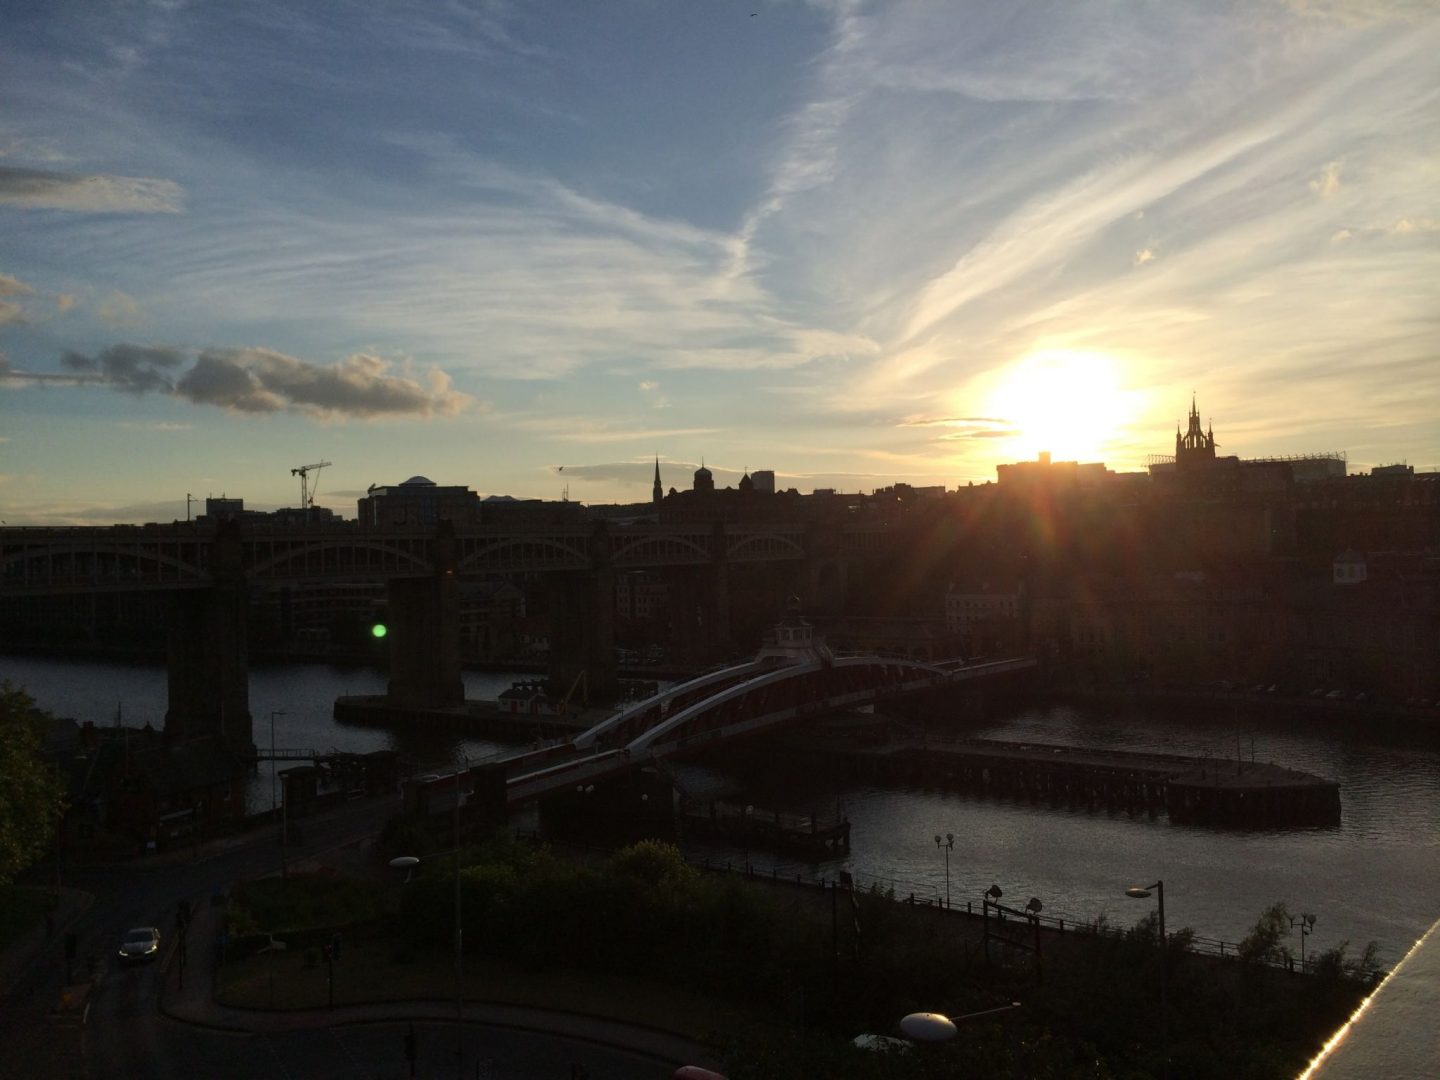 Views across Newcastle at sunset